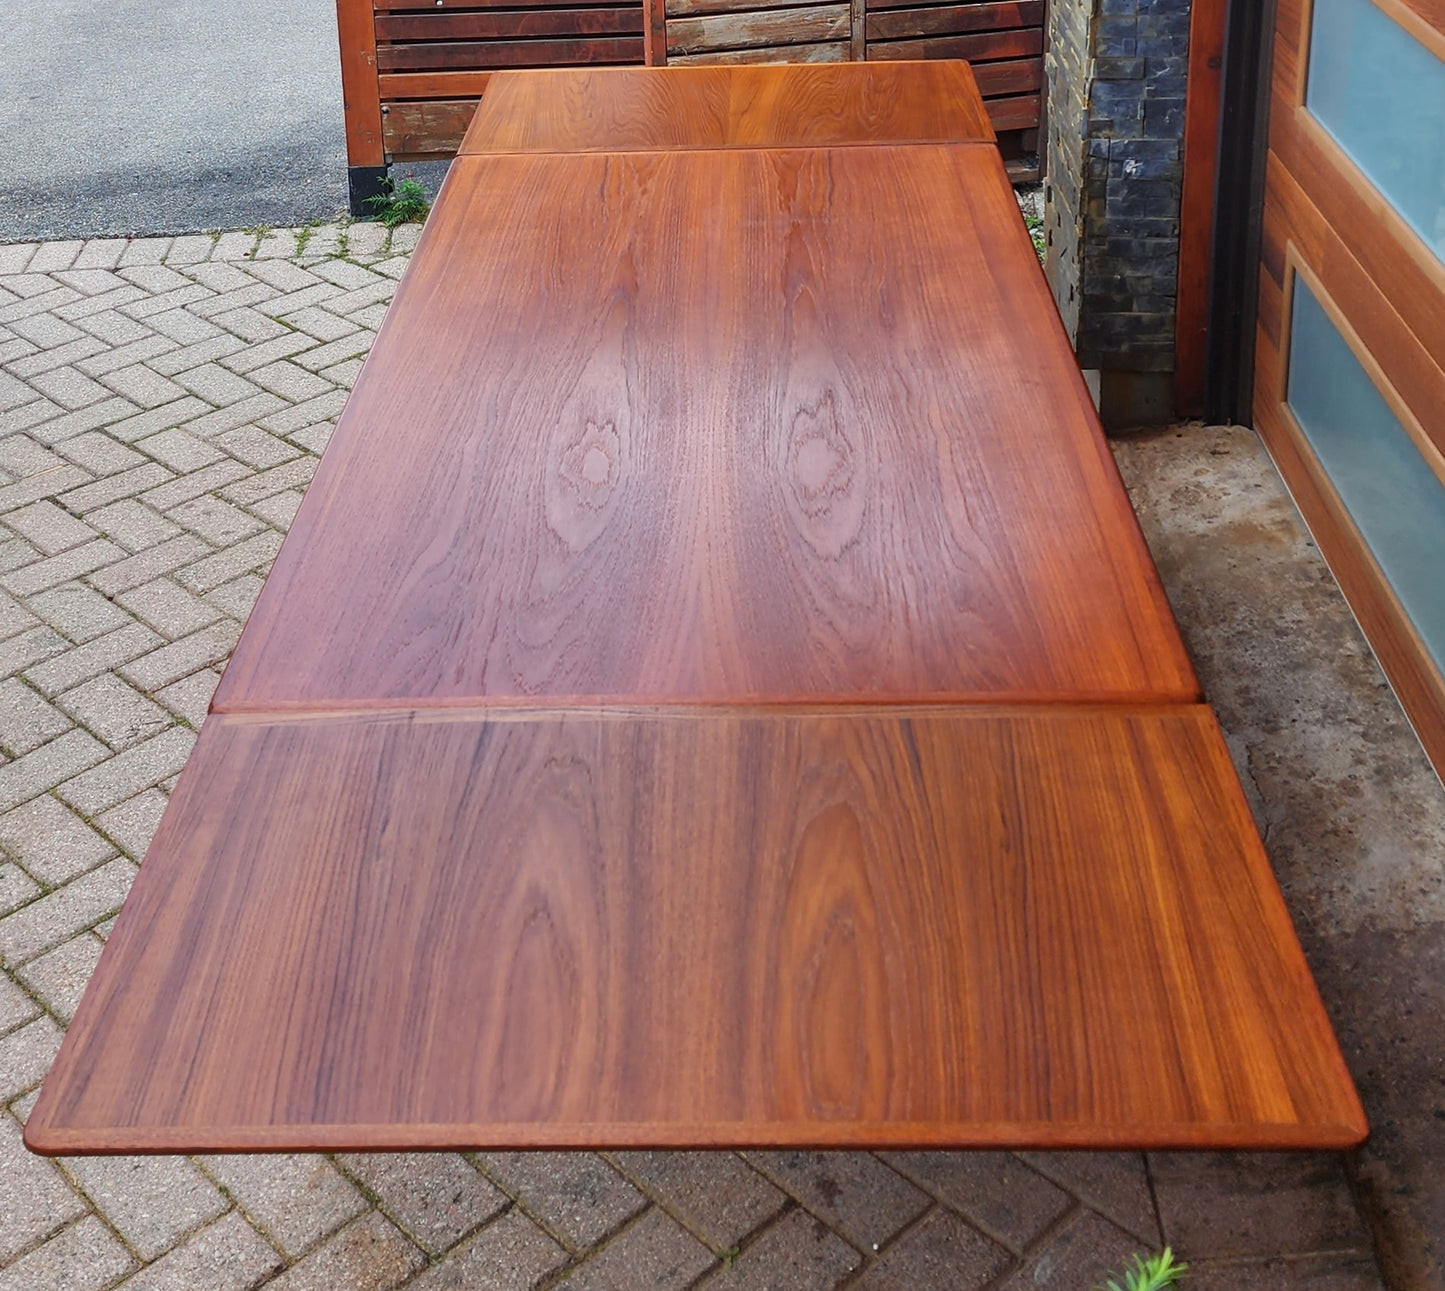 REFINISHED Danish MCM Teak Dining Table w 2 Leaves by Niels O. Moller, 63" - 102"